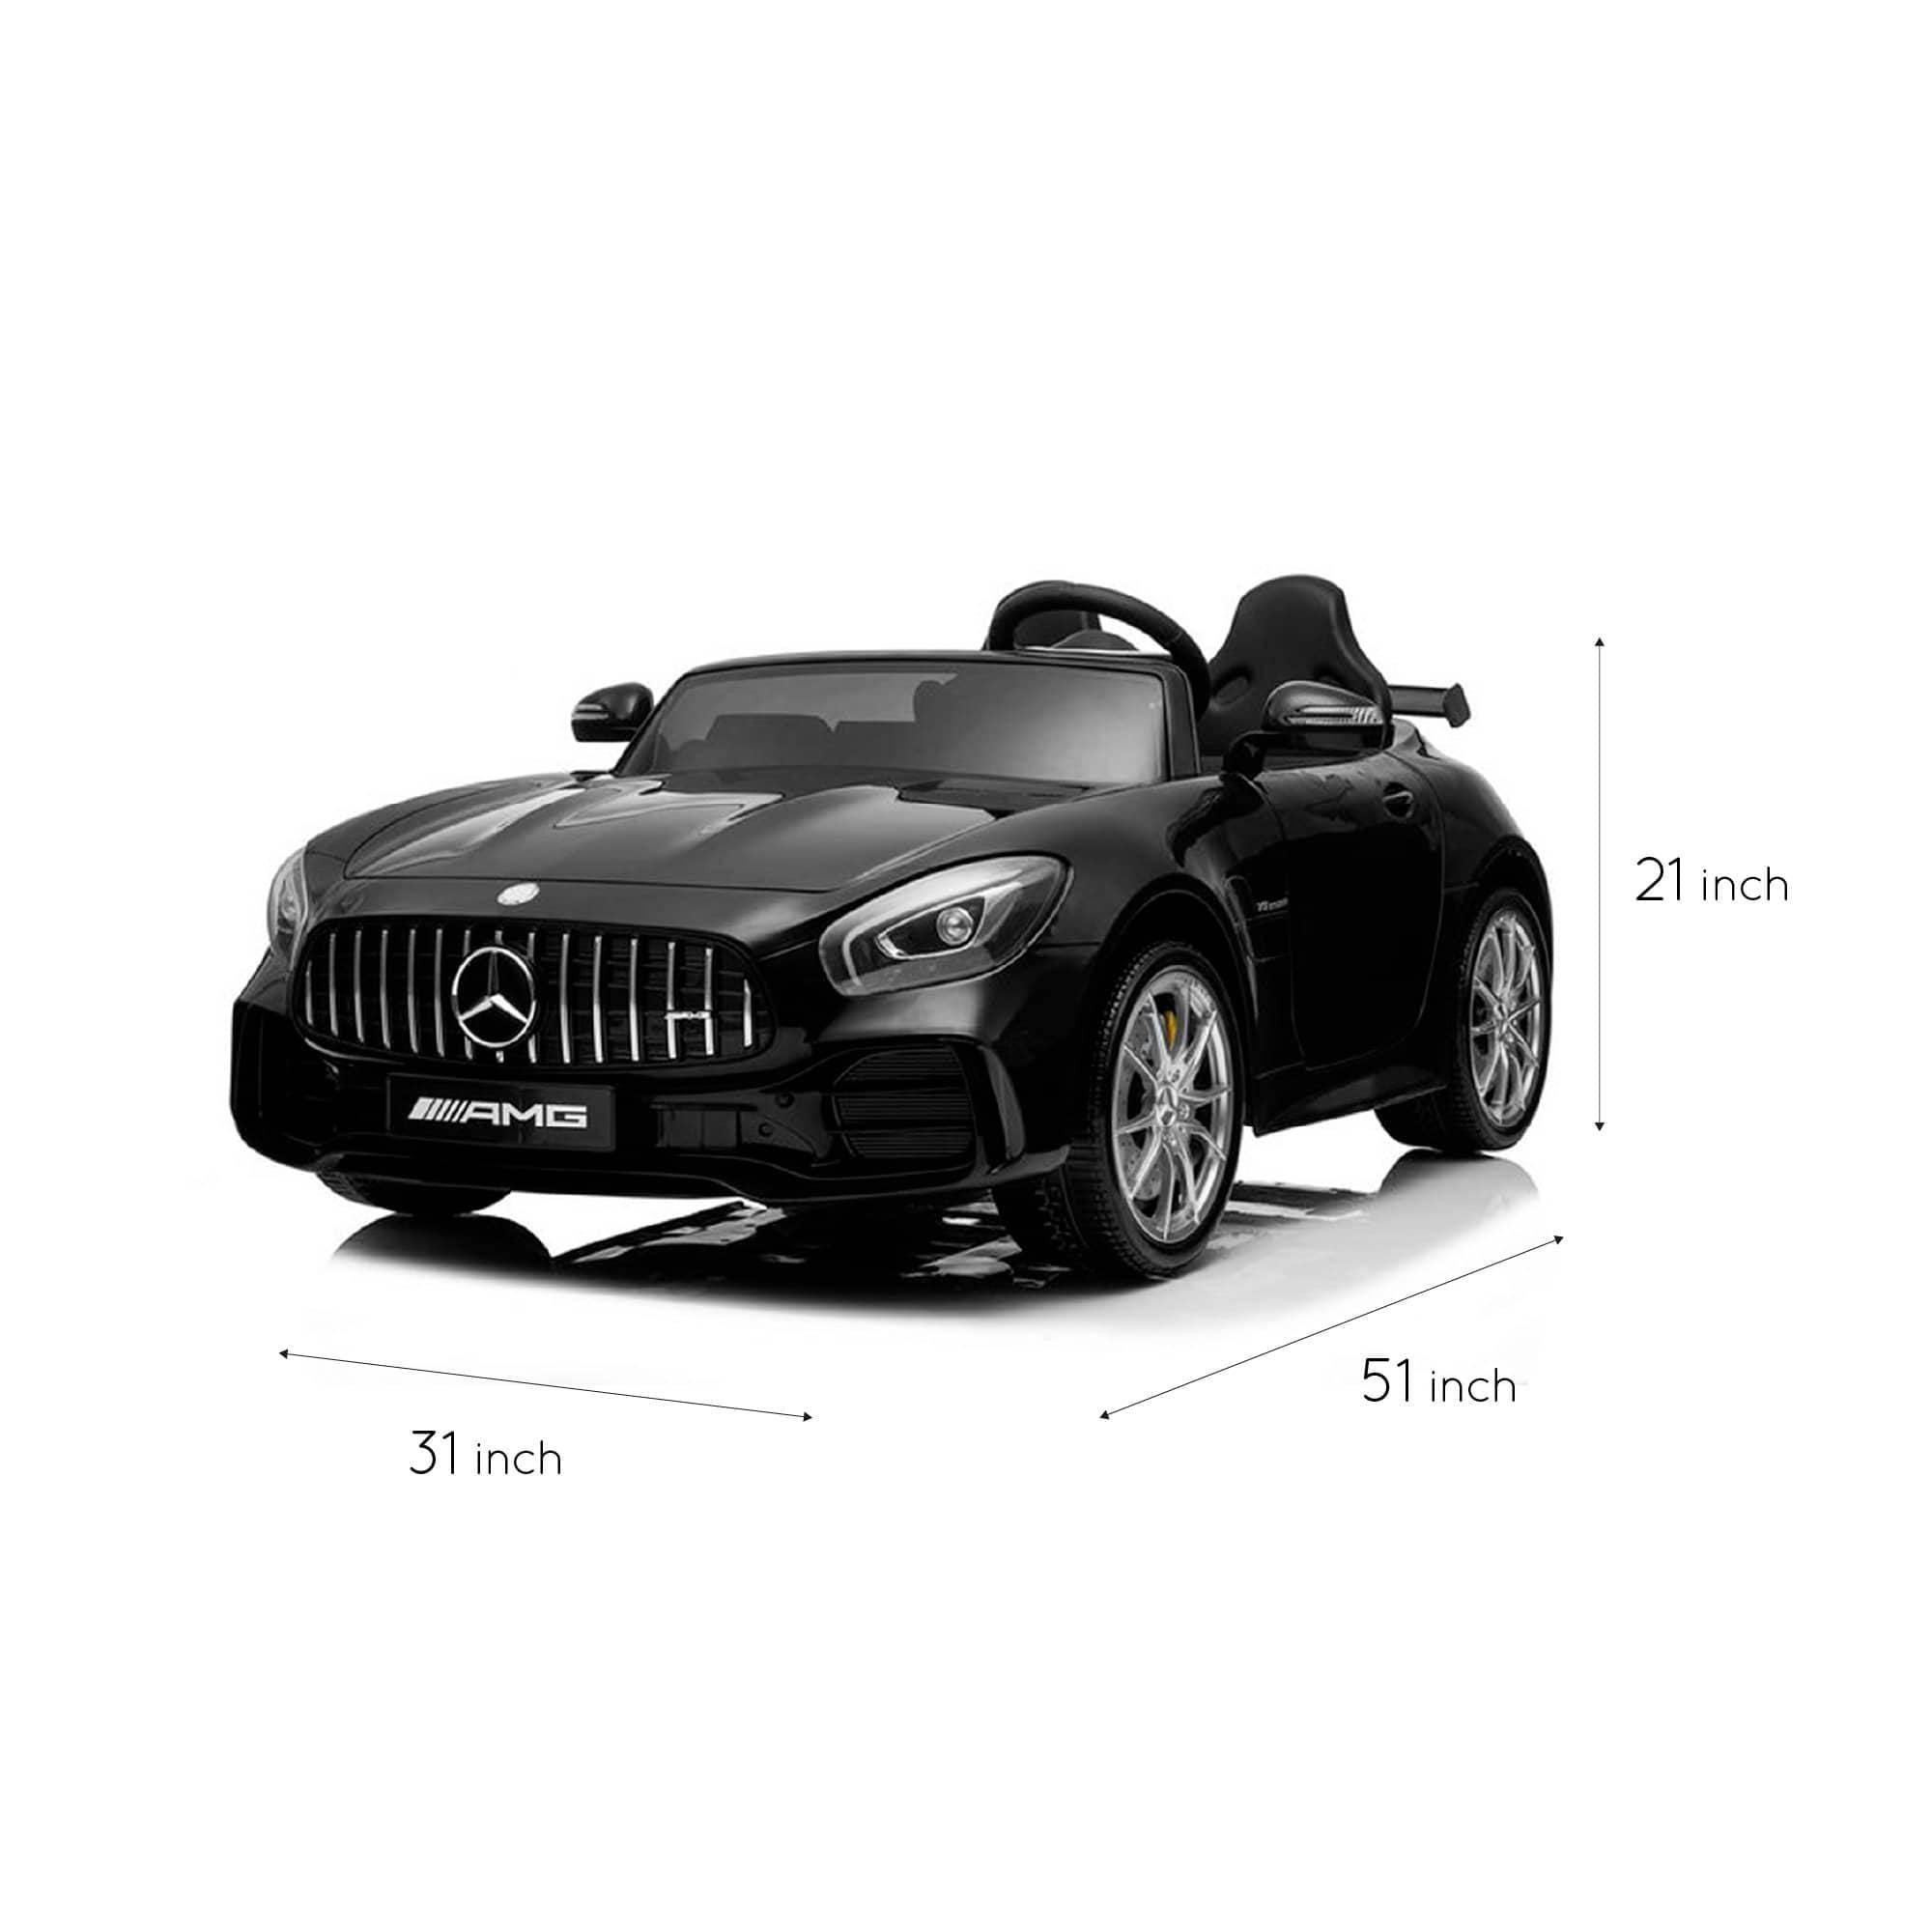 Licensed Mercedes Benz GTR AMG 12V Battery Operated 2 Seater Ride On Car With Parental Remote by Freddo - American Kids Cars